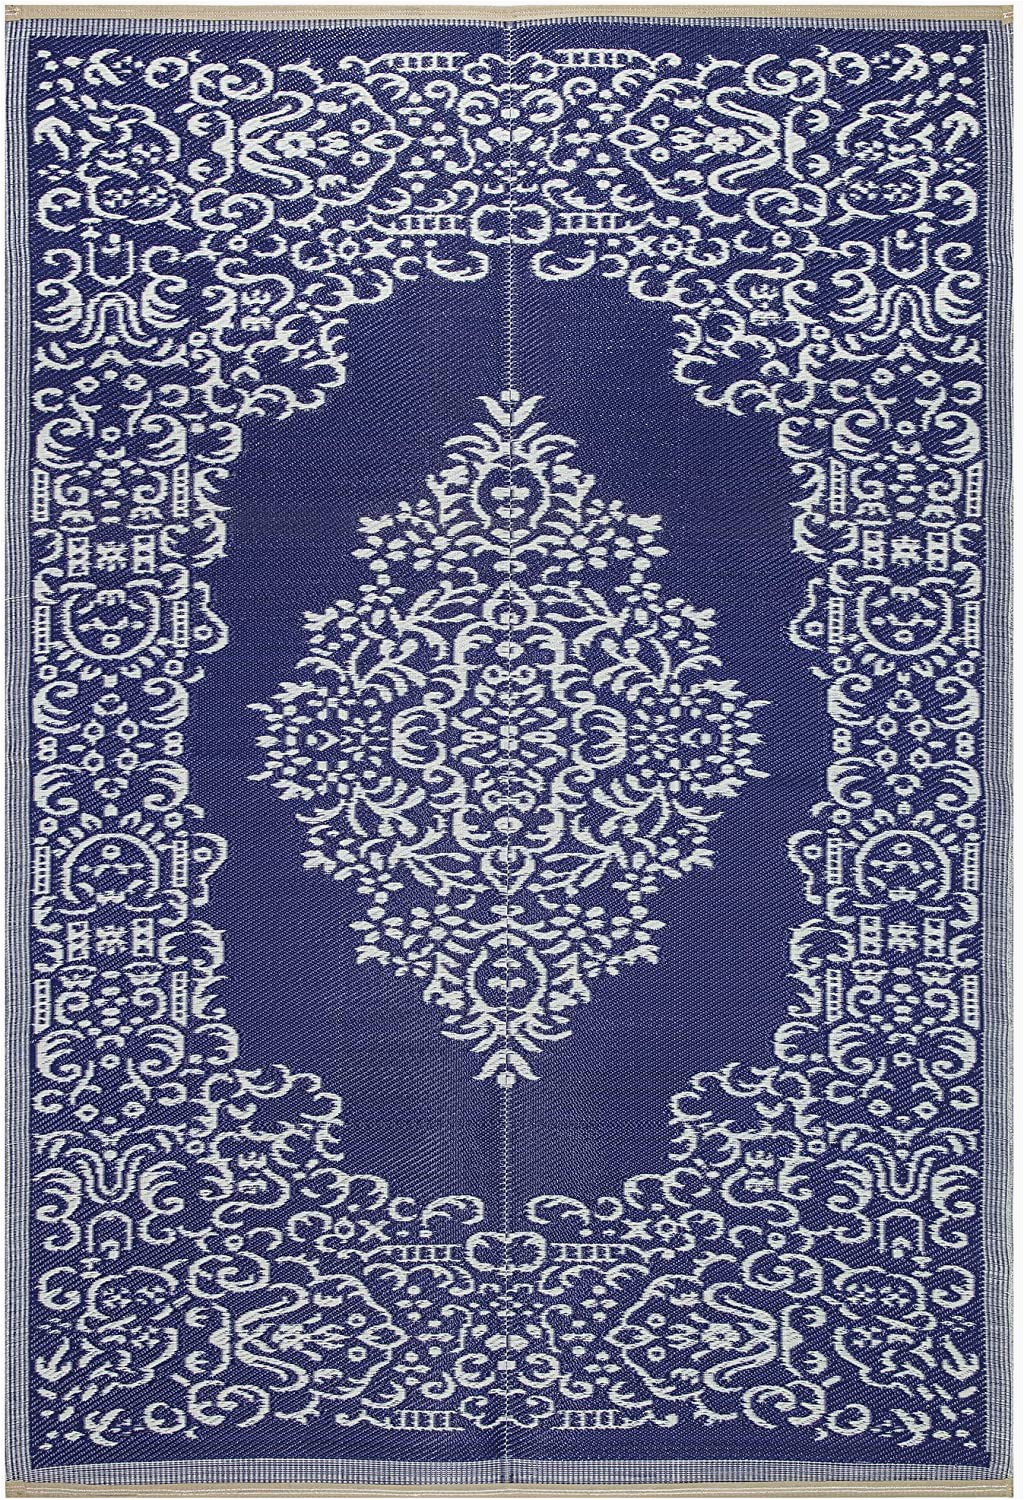 White and Blue oriental Rugs Lightweight Indoor Outdoor Reversible Plastic area Rug 5 9 X 8 9 Feet Medallion oriental Design Blue White